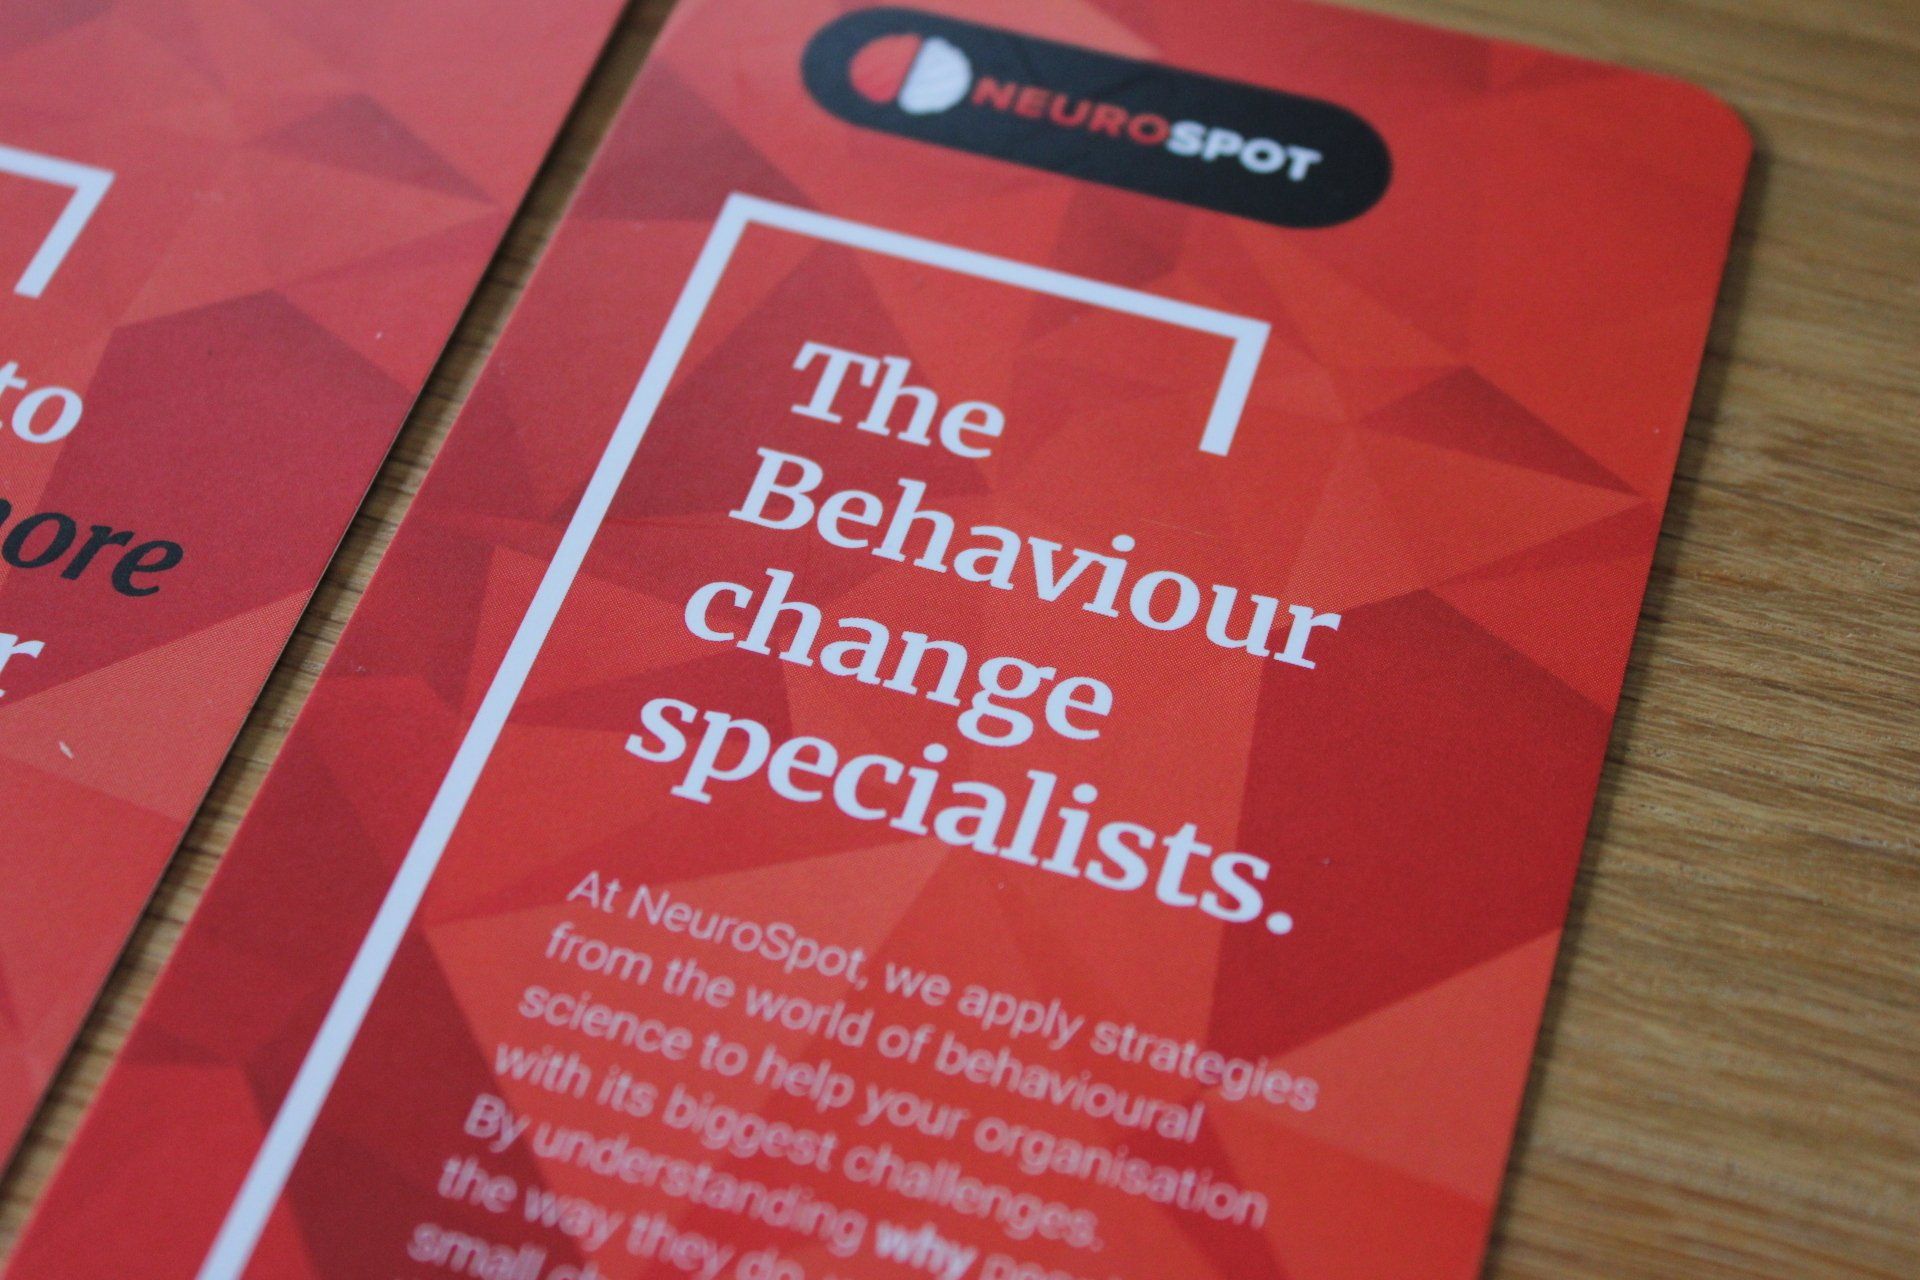 Image: A card from the NeuroSpot Behaviour Change Toolkit saying 'The behaviour change specialists'